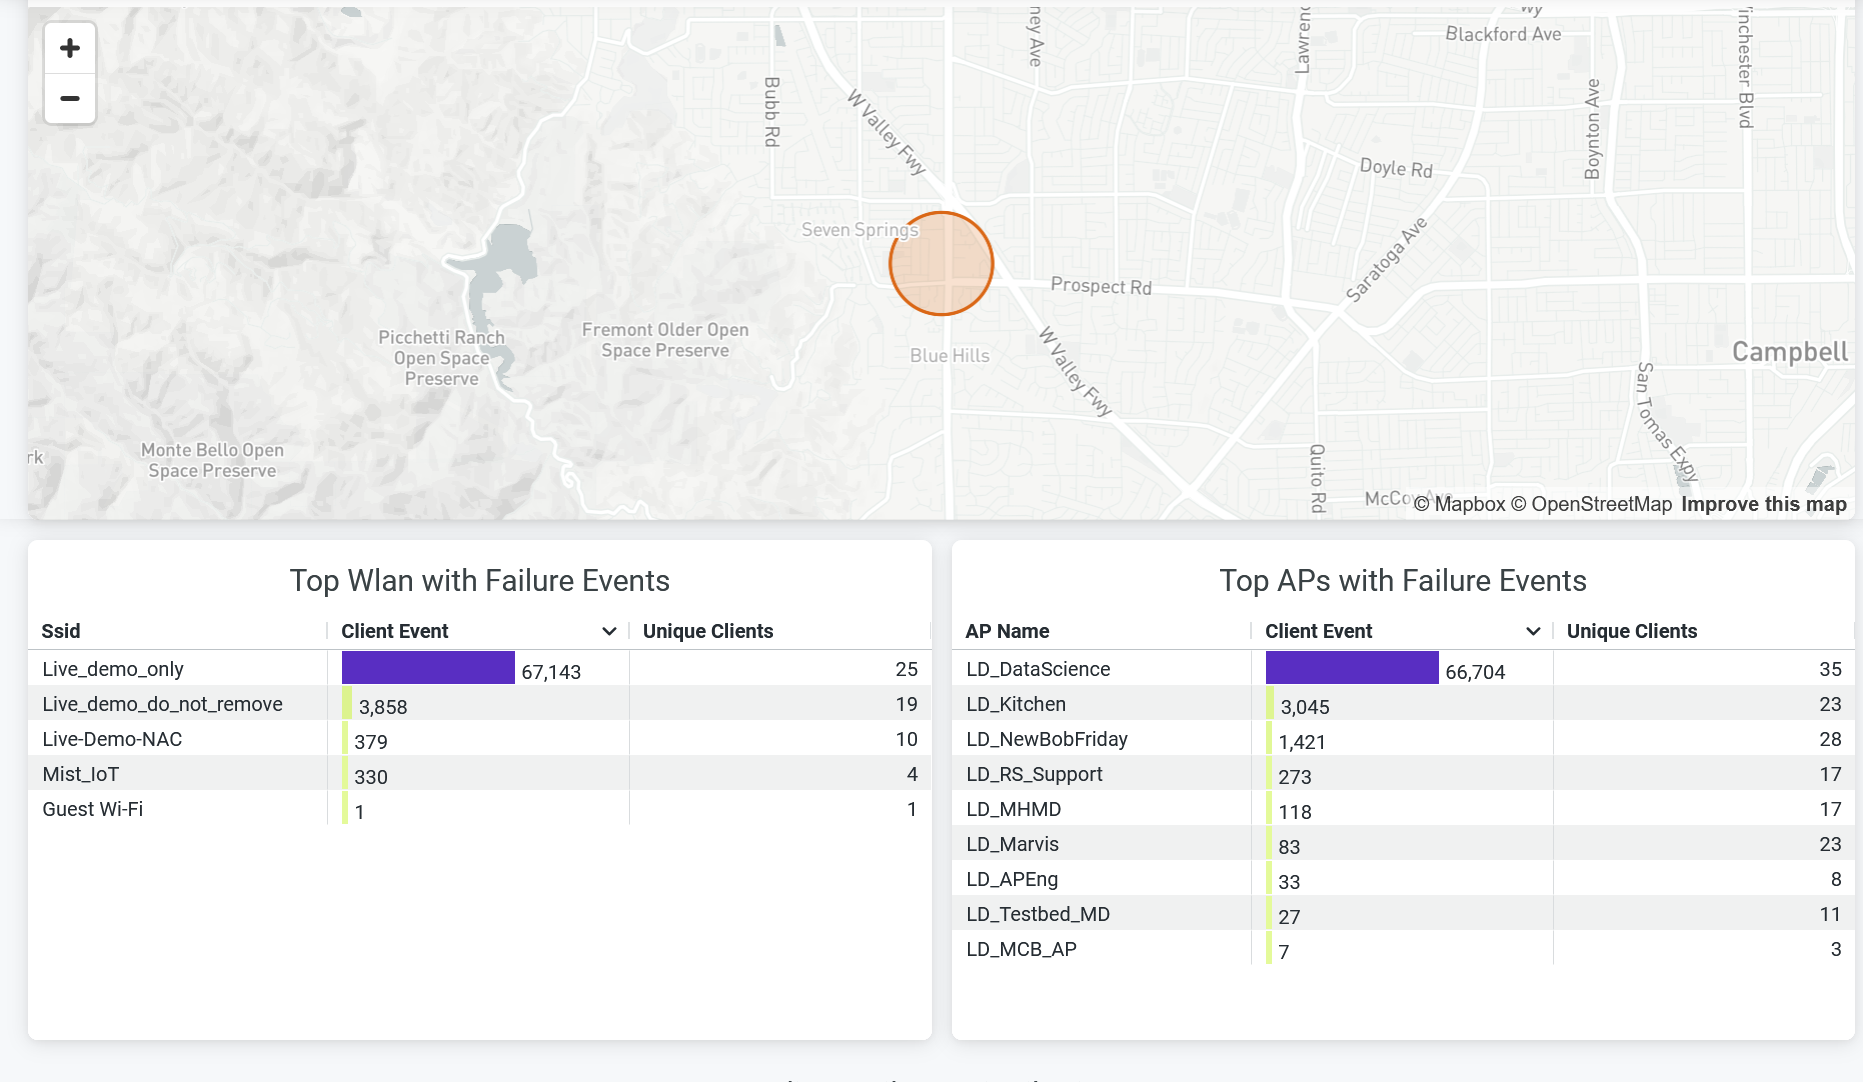 Failure Events Distribution Across Sites, SSID and APs